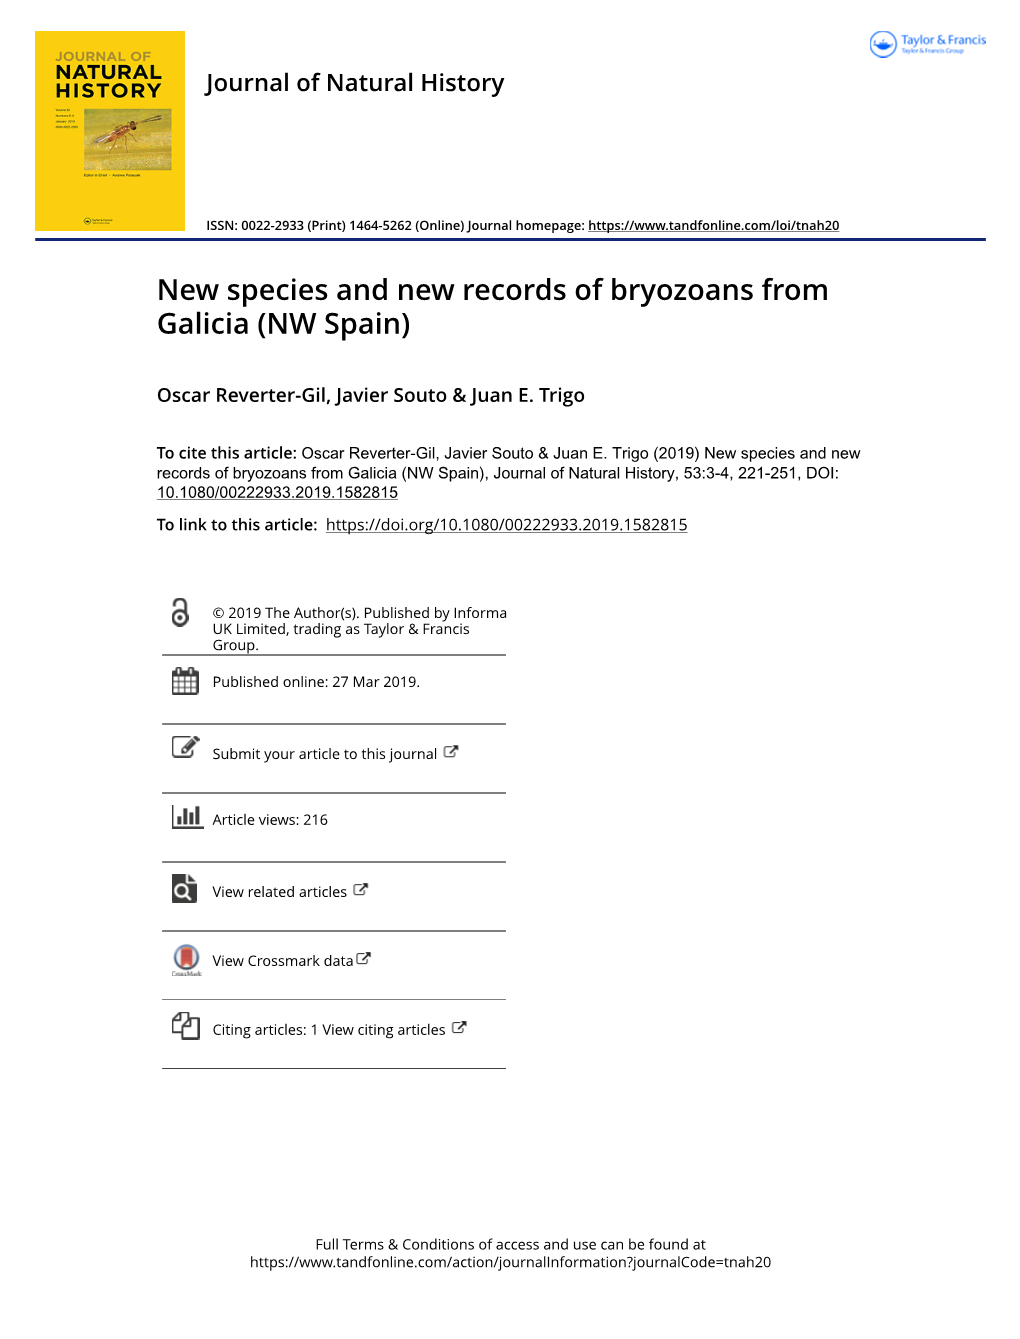 New Species and New Records of Bryozoans from Galicia (NW Spain)